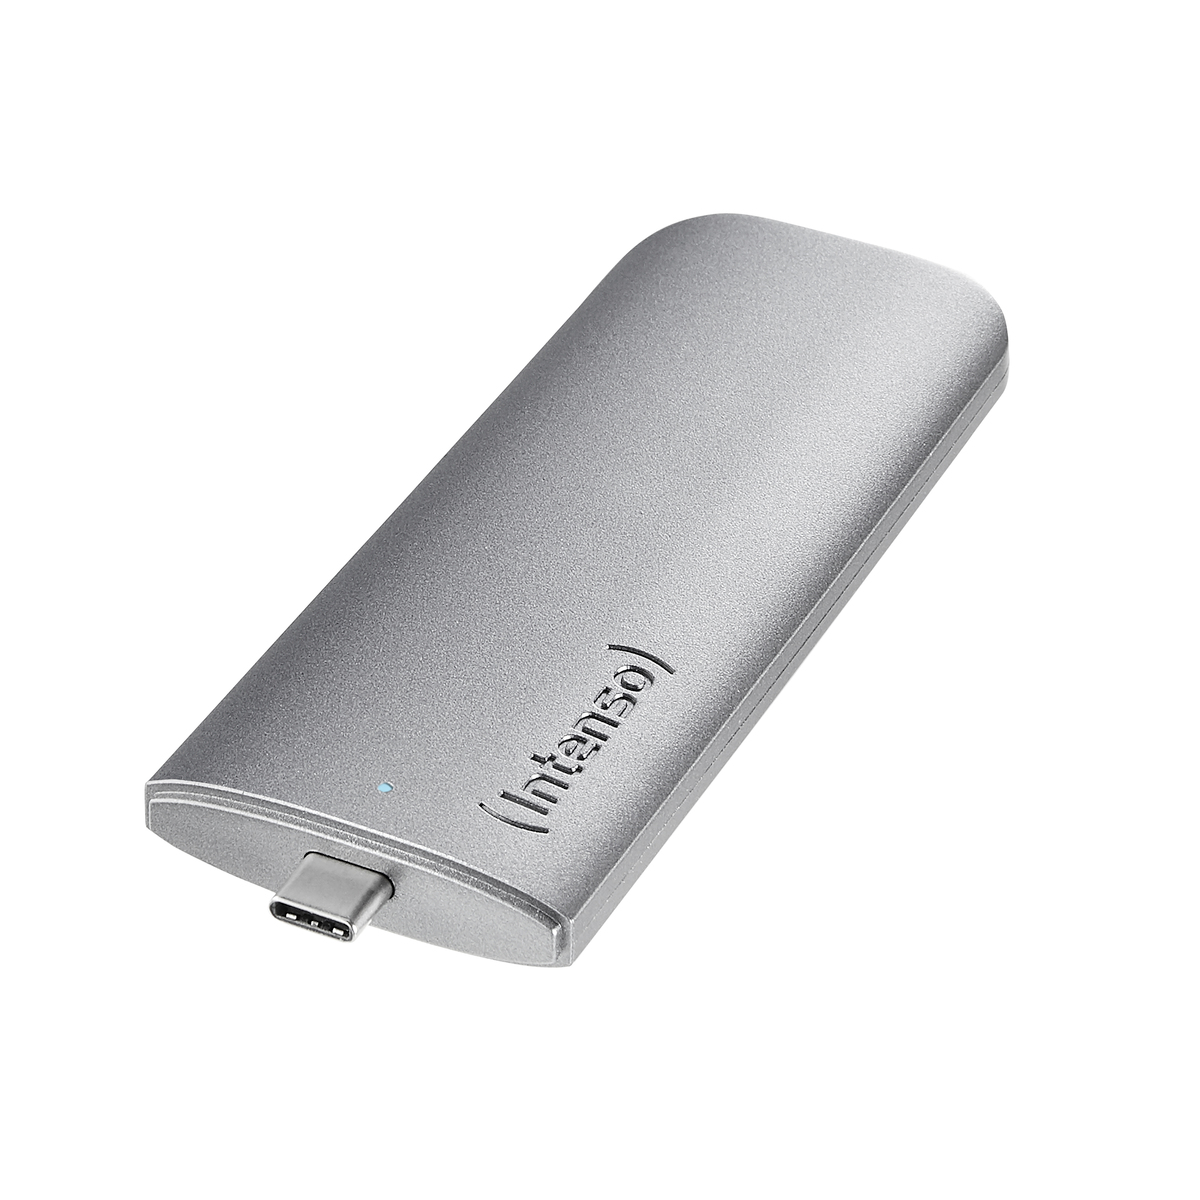 Intenso 500GB External SSD Business Edition 1,8"